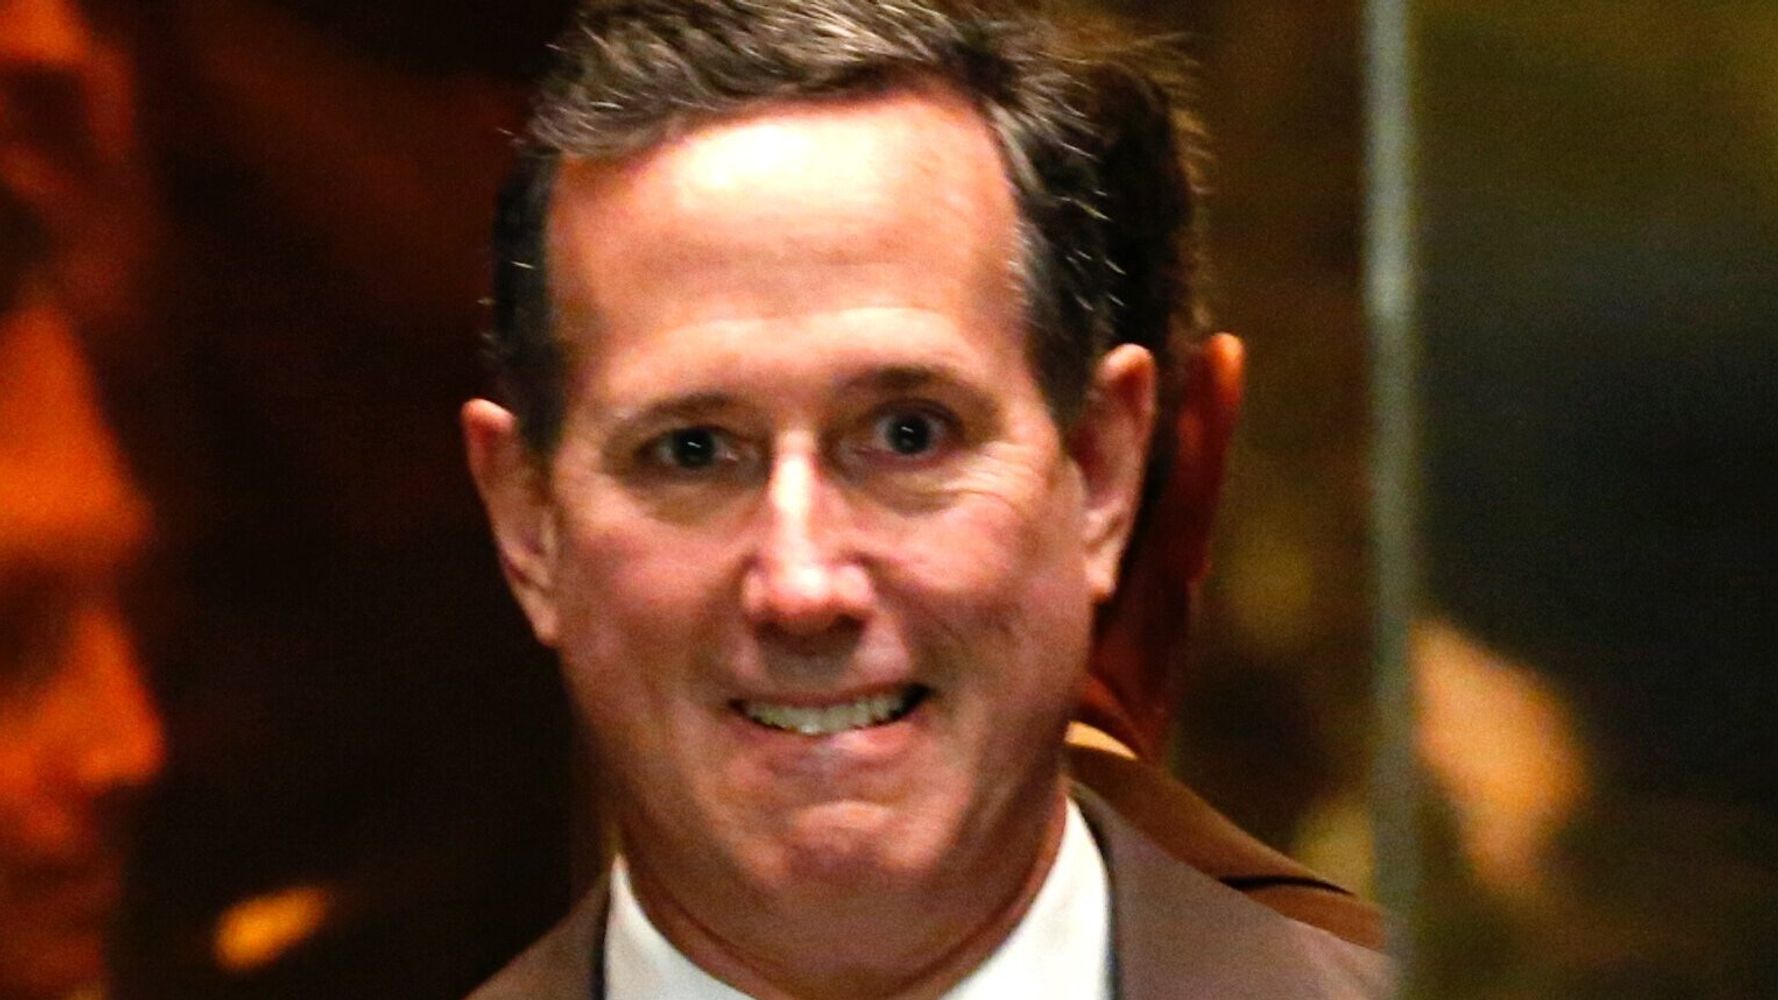 These Are The Offensive Things Rick Santorum Said Even Before He Was Axed From CNN